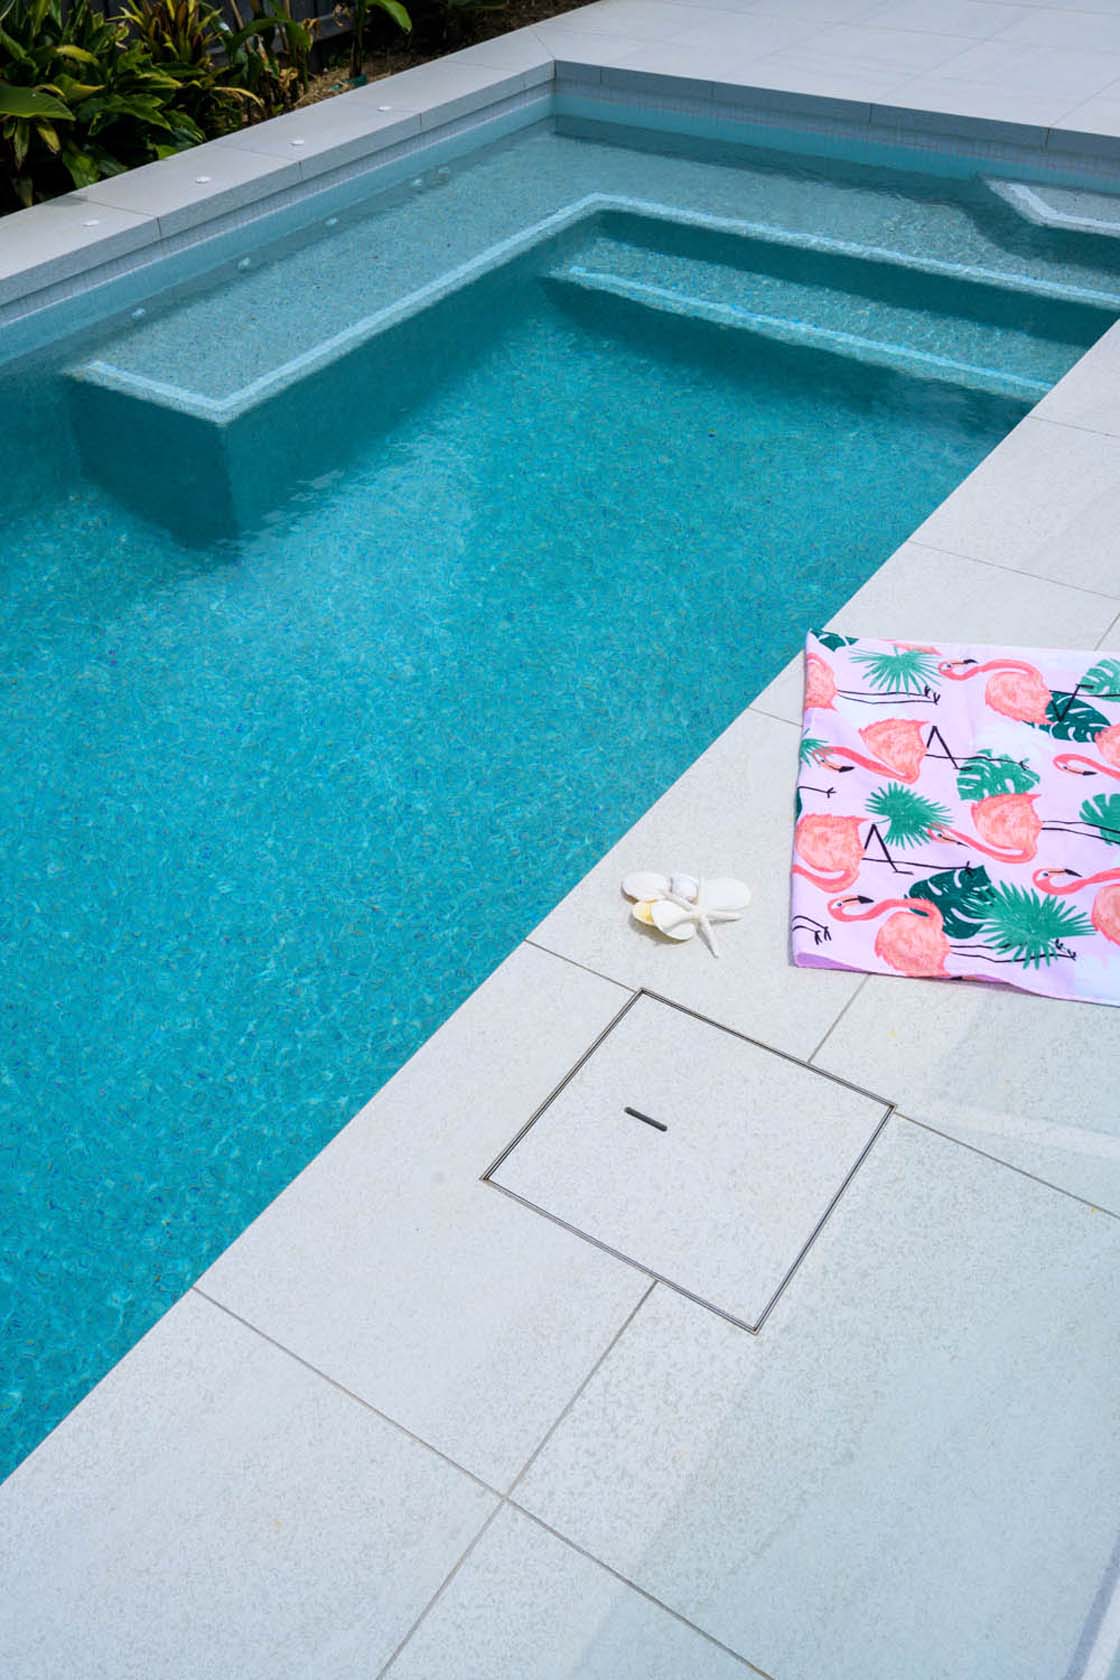 Coconut Drift Porcelain Dropface pool coping and surrounds with Urban White ceramic waterline tiles